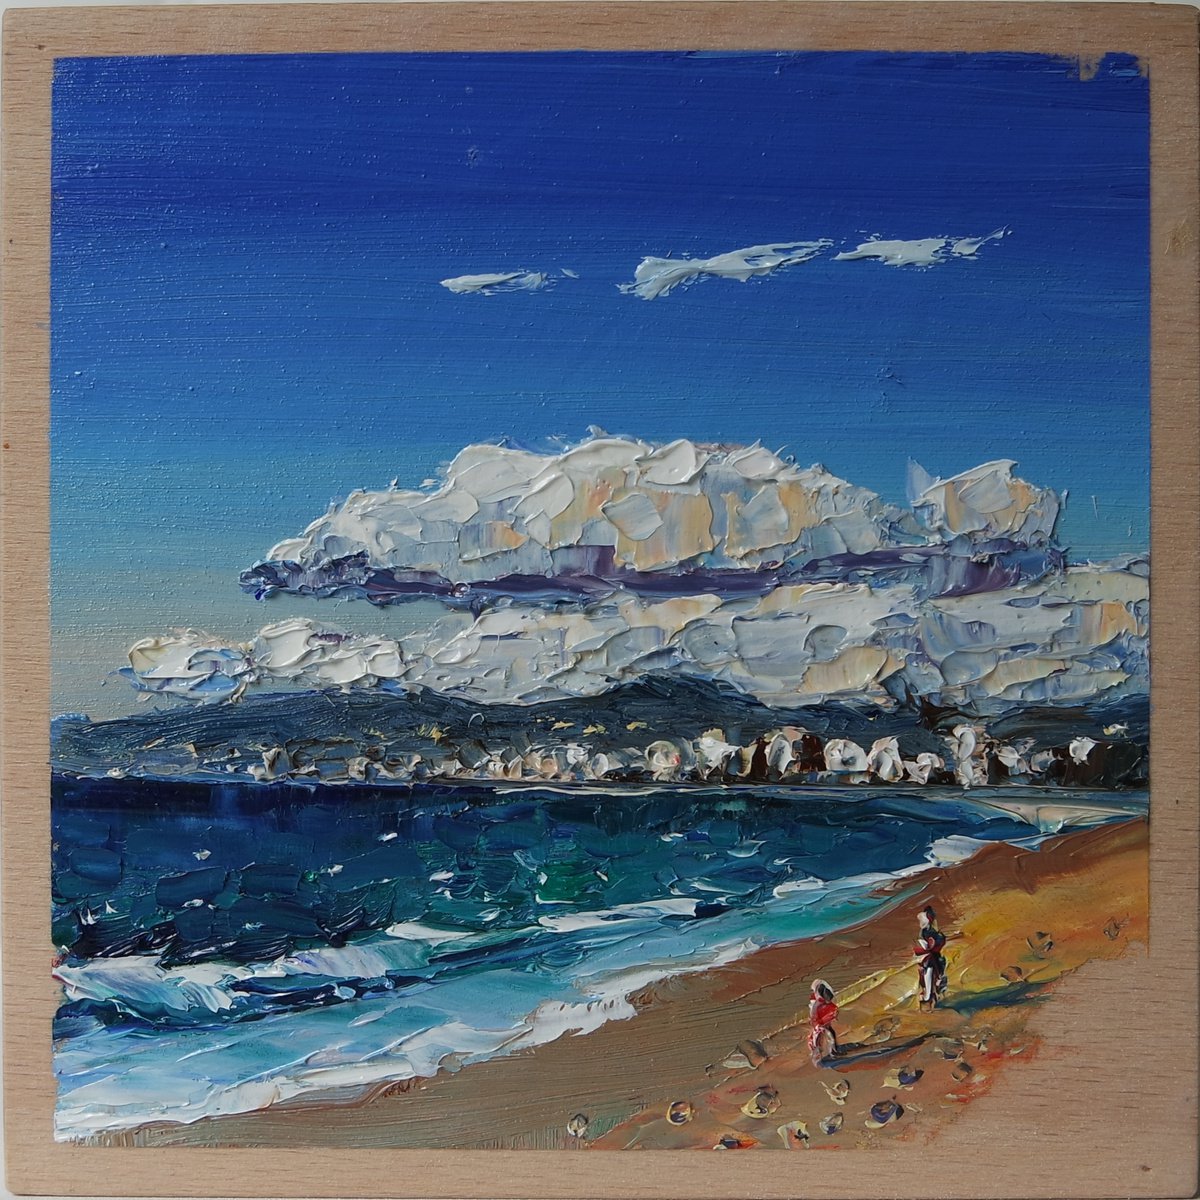 ’TURKISH RIVIERA, ALANYA’ - Small Oil Painting on Wood Panel by Ion Sheremet